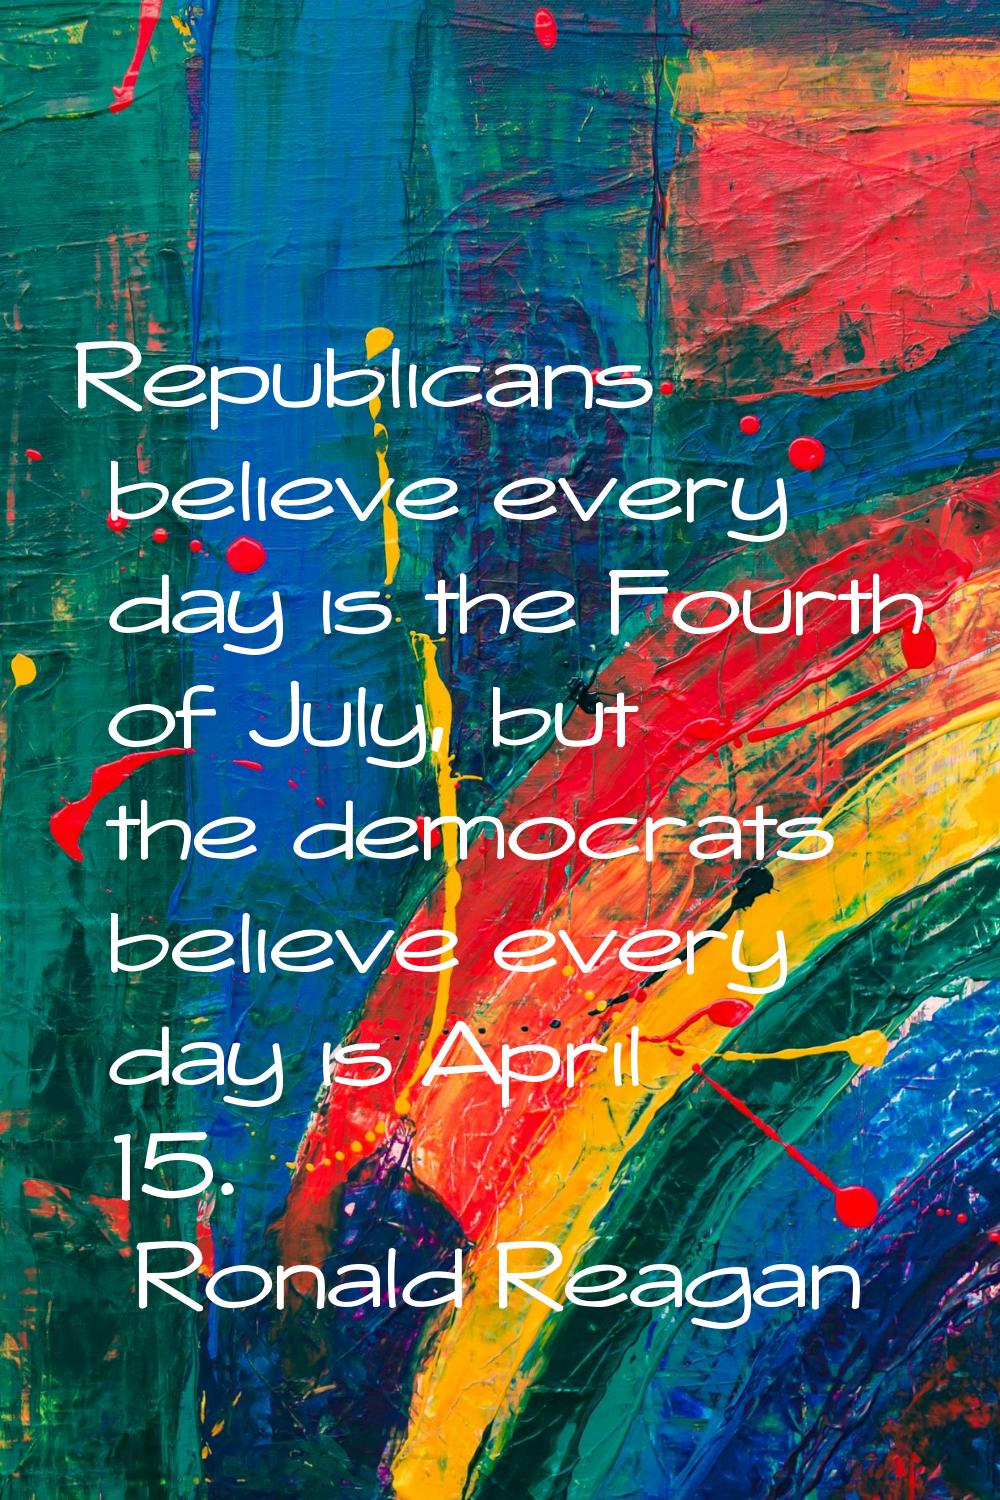 Republicans believe every day is the Fourth of July, but the democrats believe every day is April 1